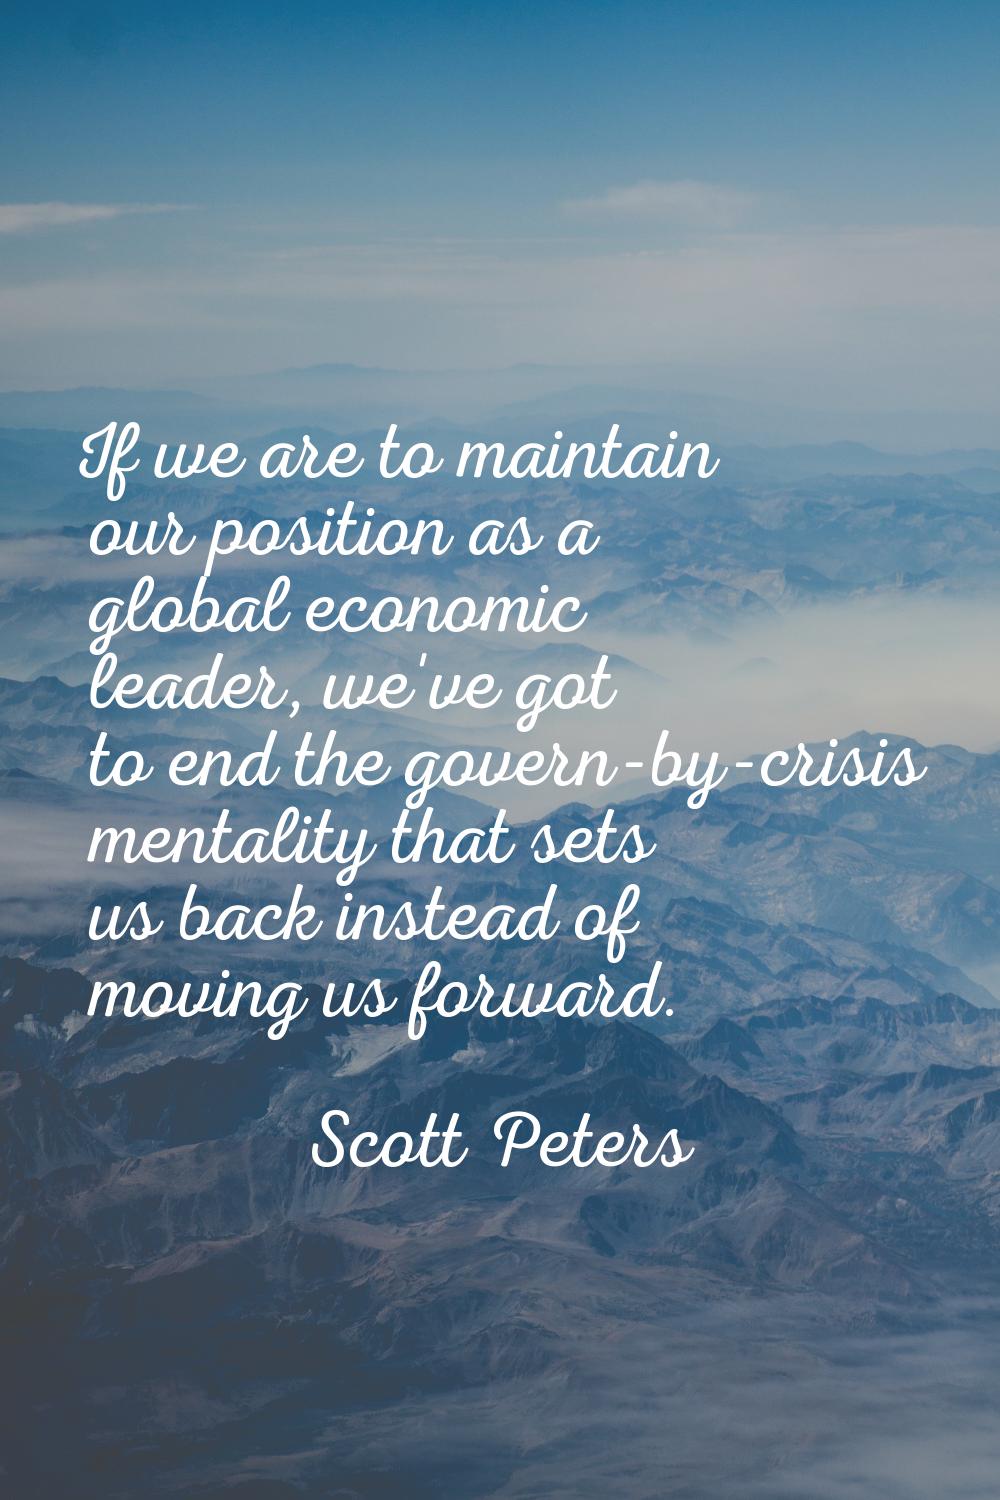 If we are to maintain our position as a global economic leader, we've got to end the govern-by-cris